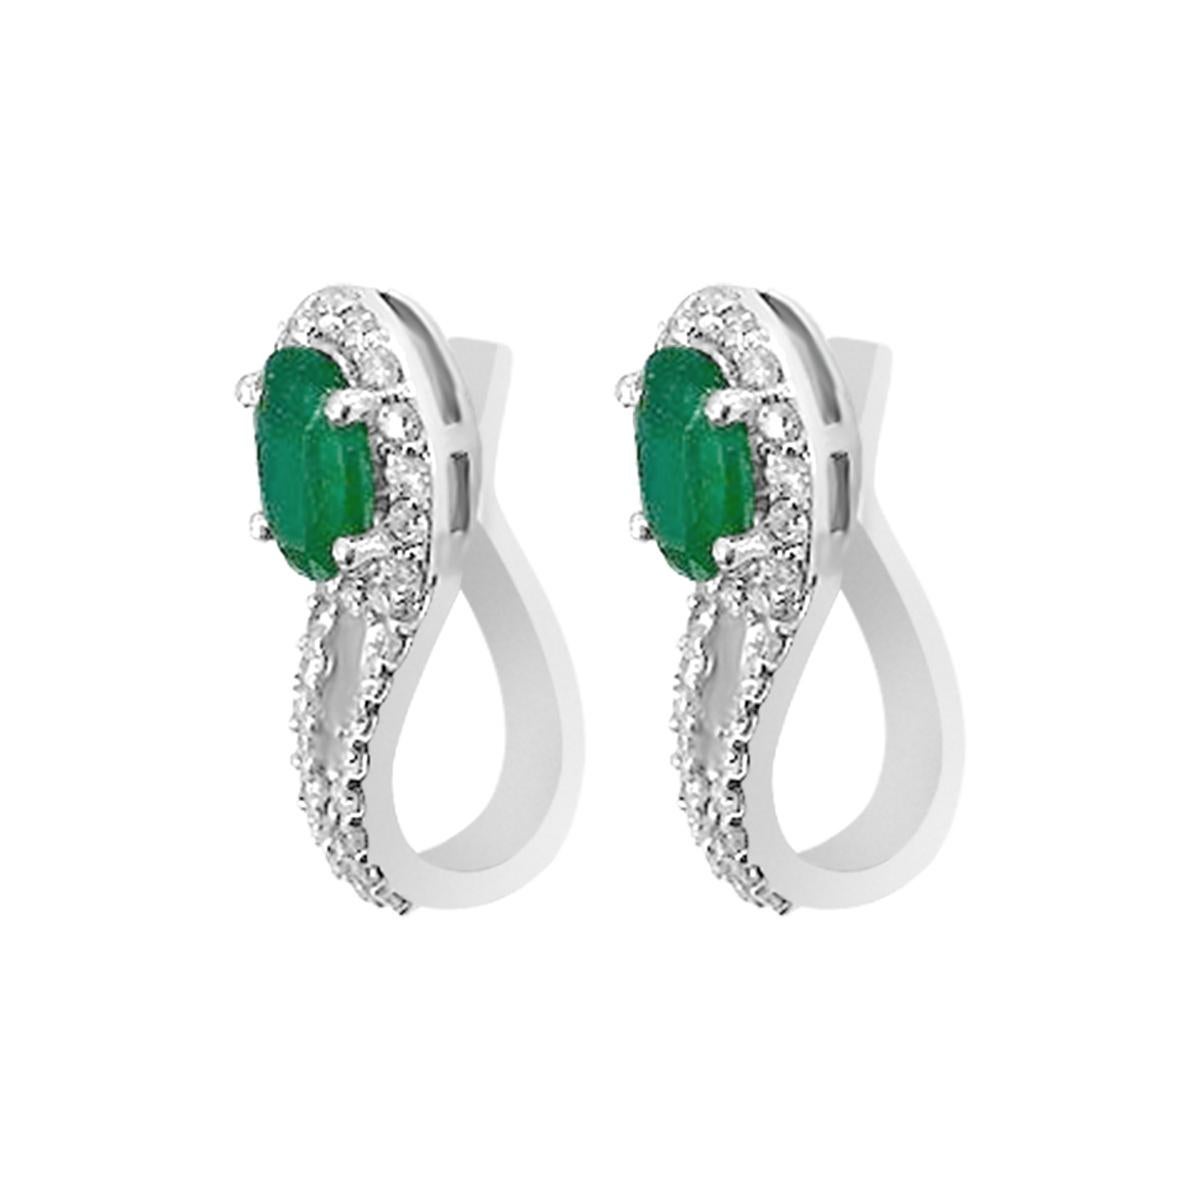 Modern 18K White Gold 1.29cts Emerald and Diamond Earring, Style# TS1020E